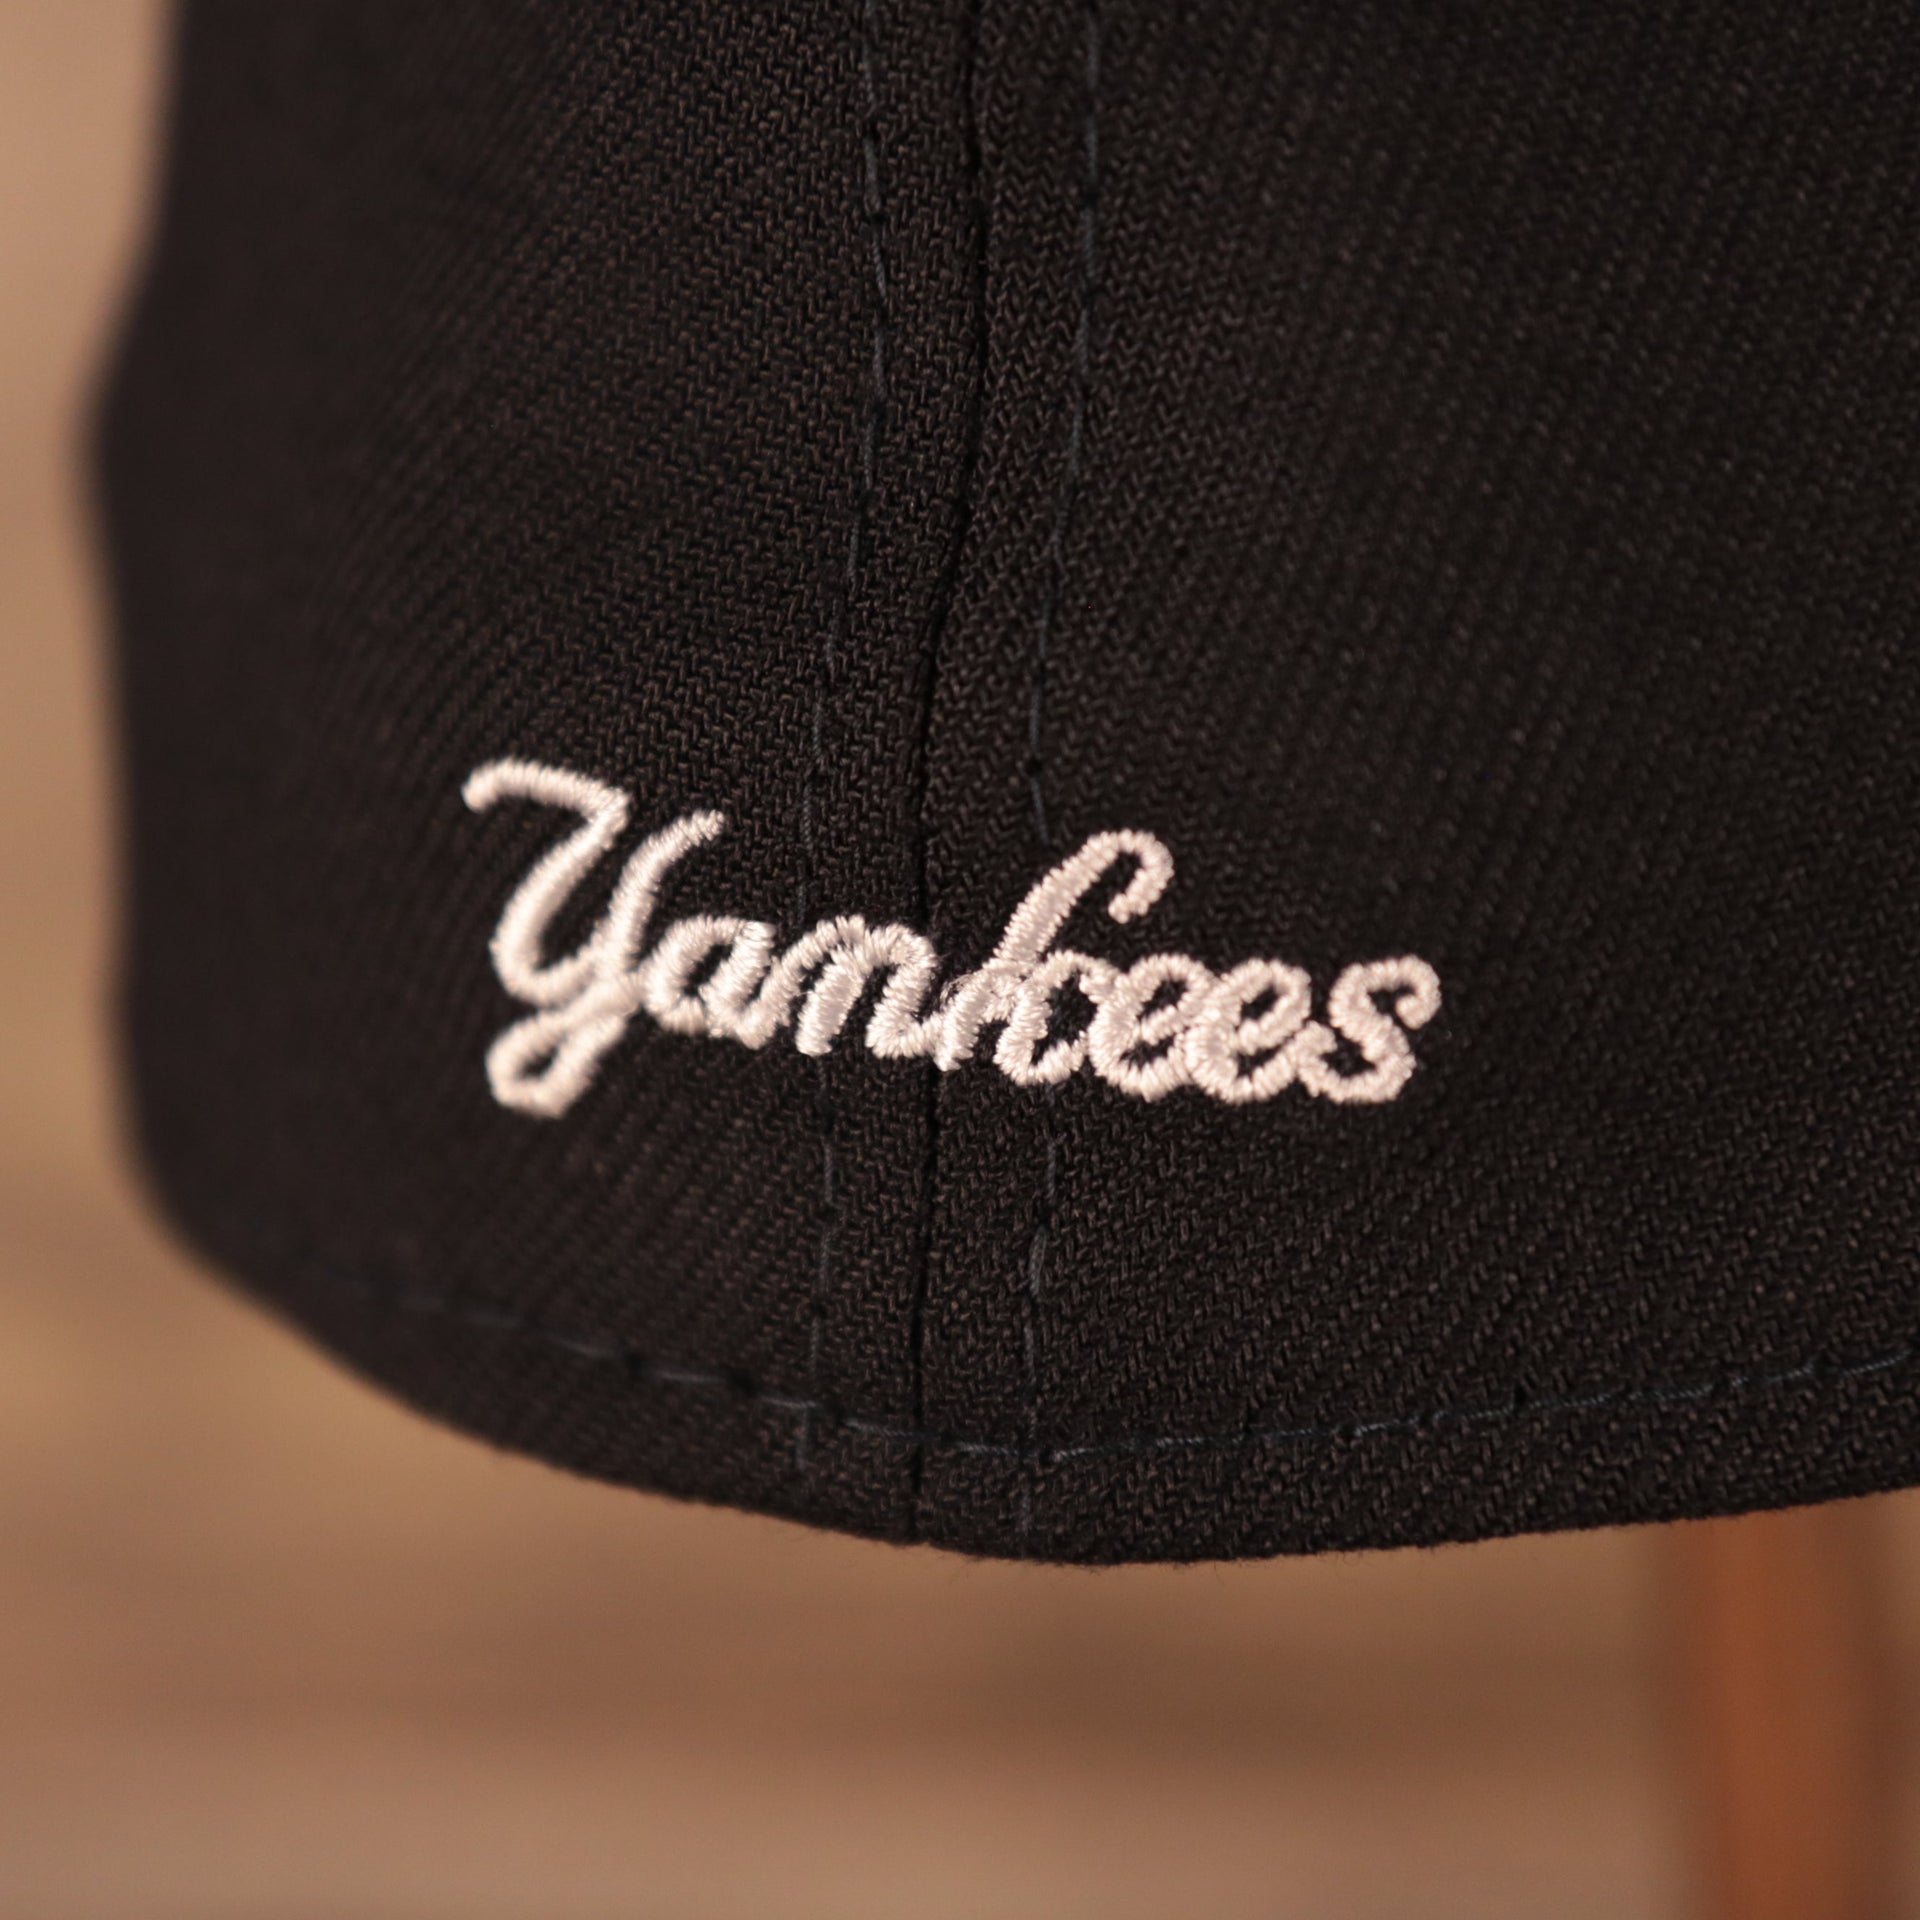 A closeup shot of the Yankees patch on the backside of the New York Yankees 2021 fourth of July navy 39thirty flexfit hat.